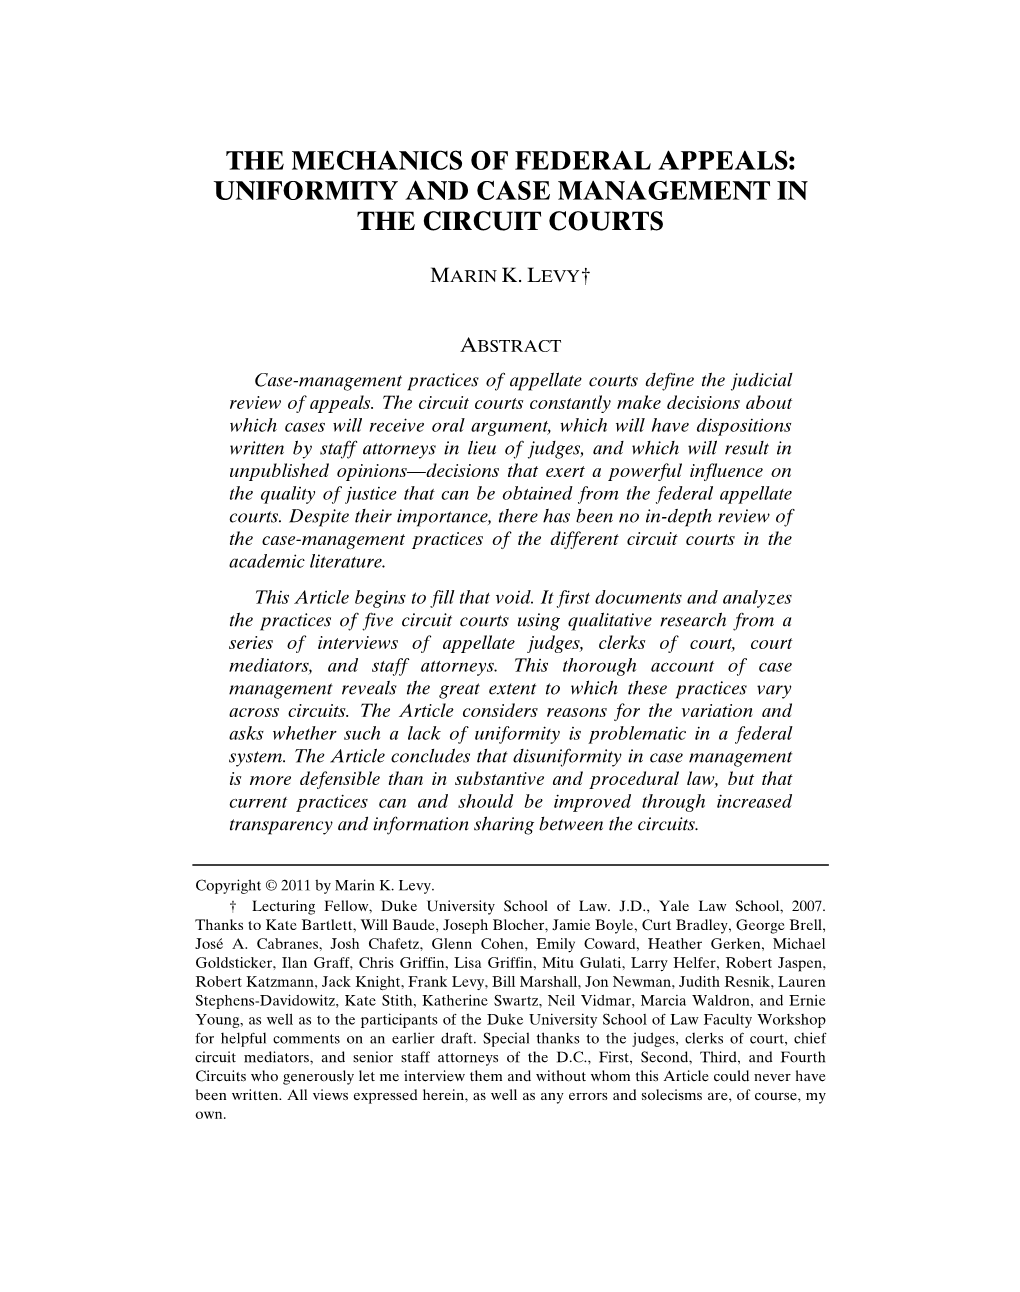 Uniformity and Case Management in the Circuit Courts